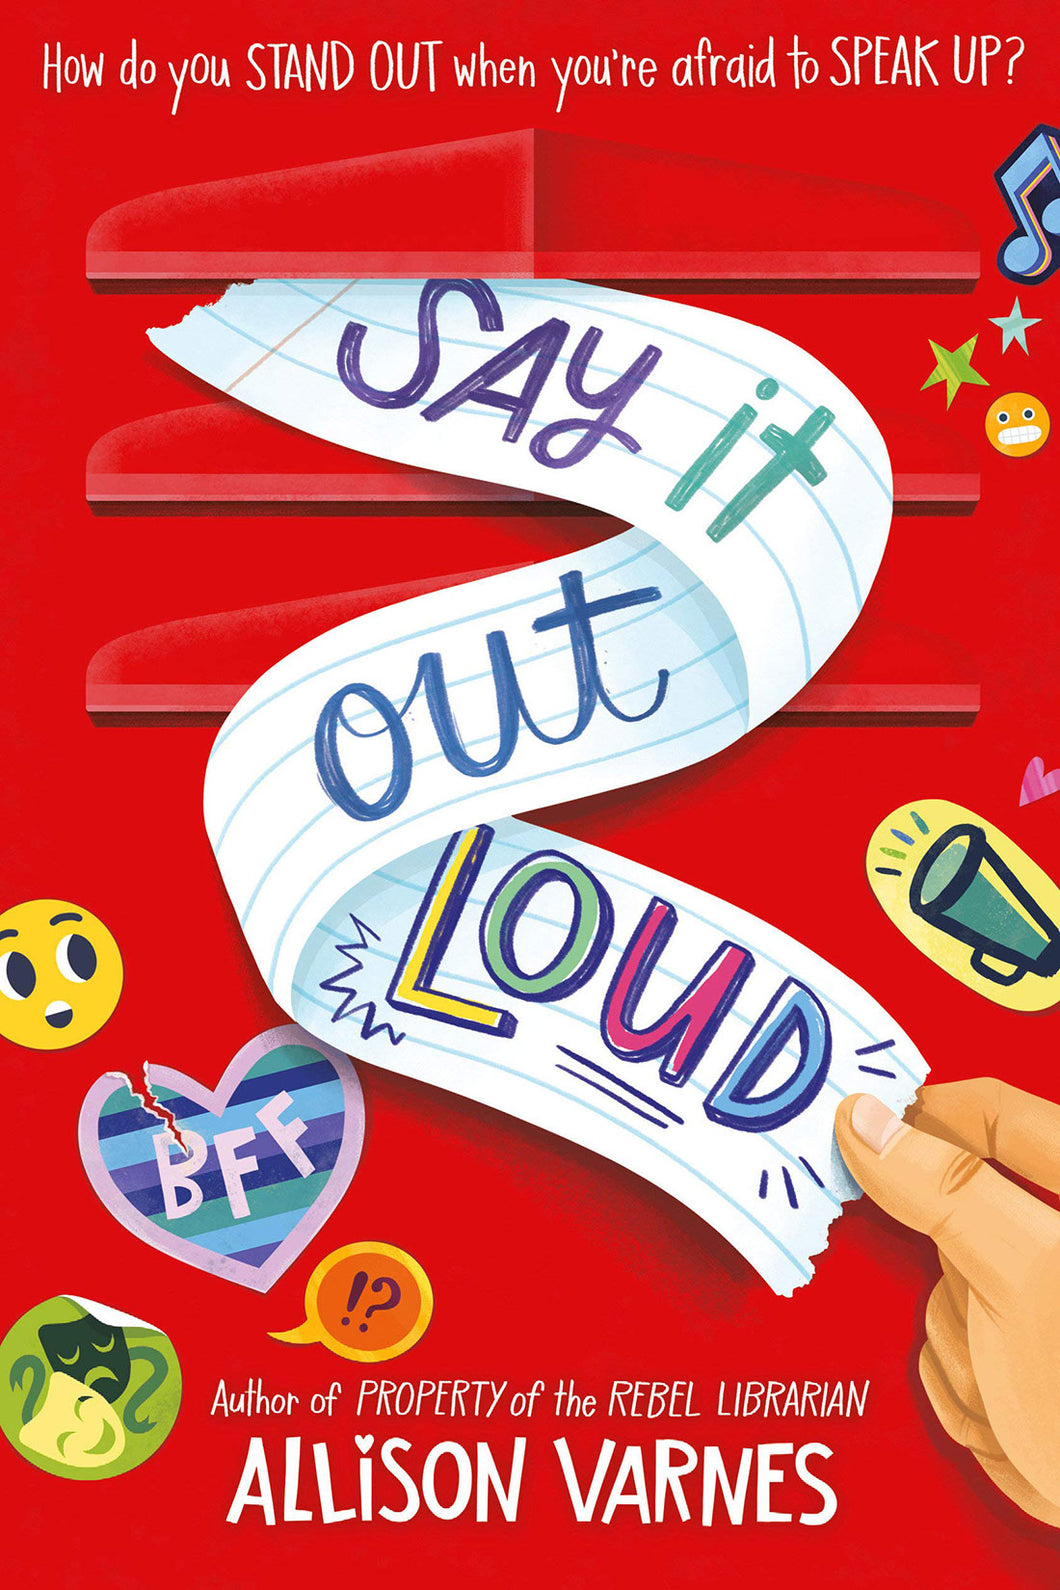 Say It Out Loud by Allison Varnes / Hardcover - NEW BOOK